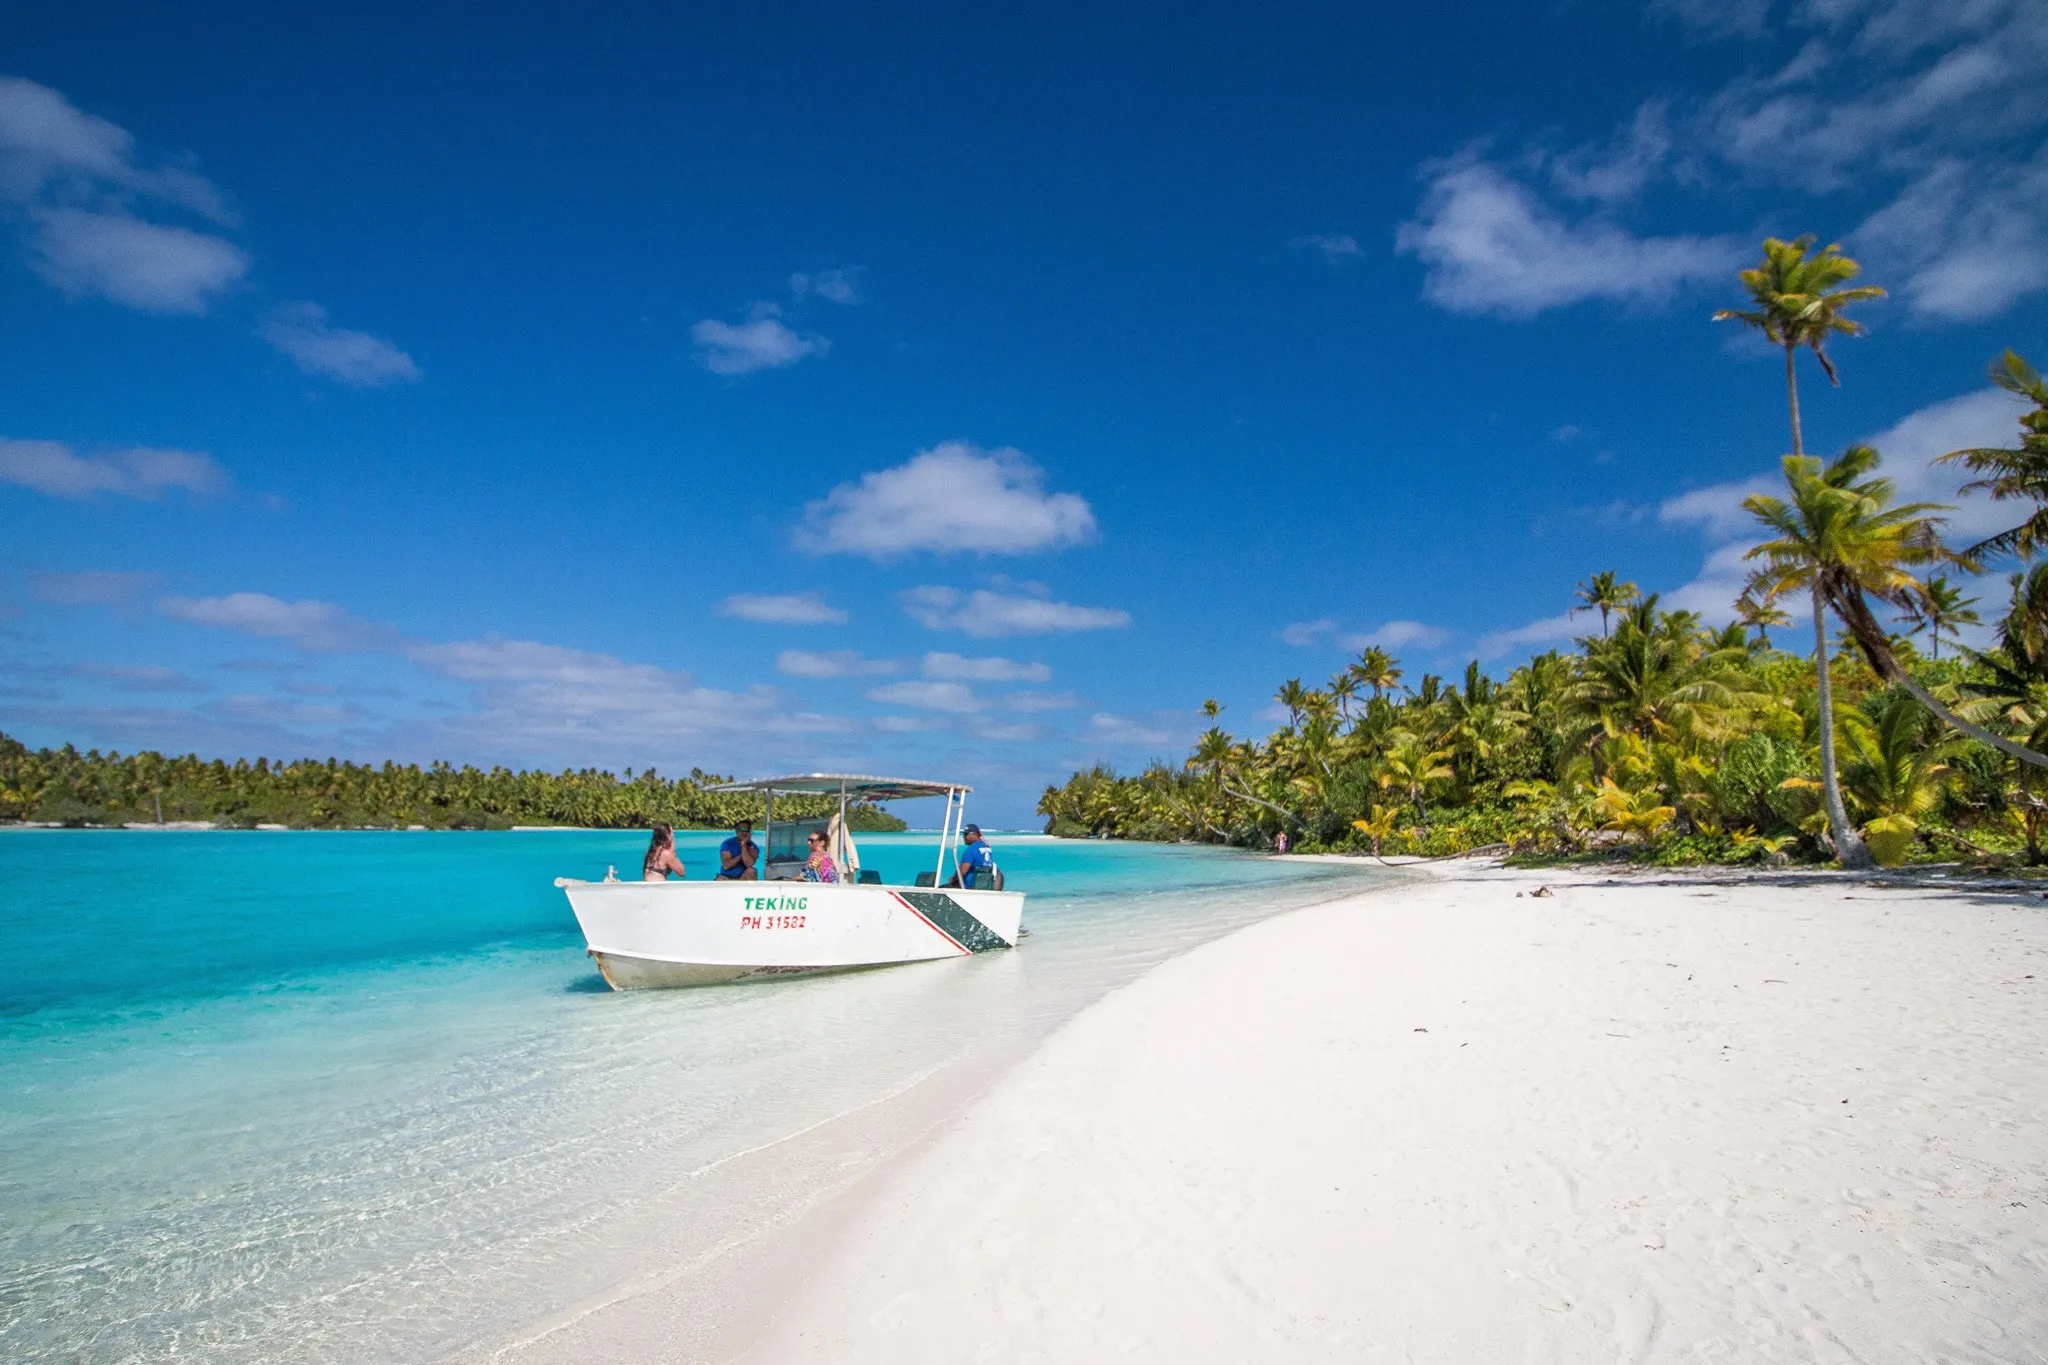 Teking Lagoon Cruises in Cook Islands, Australia and Oceania | Excursions - Rated 0.9